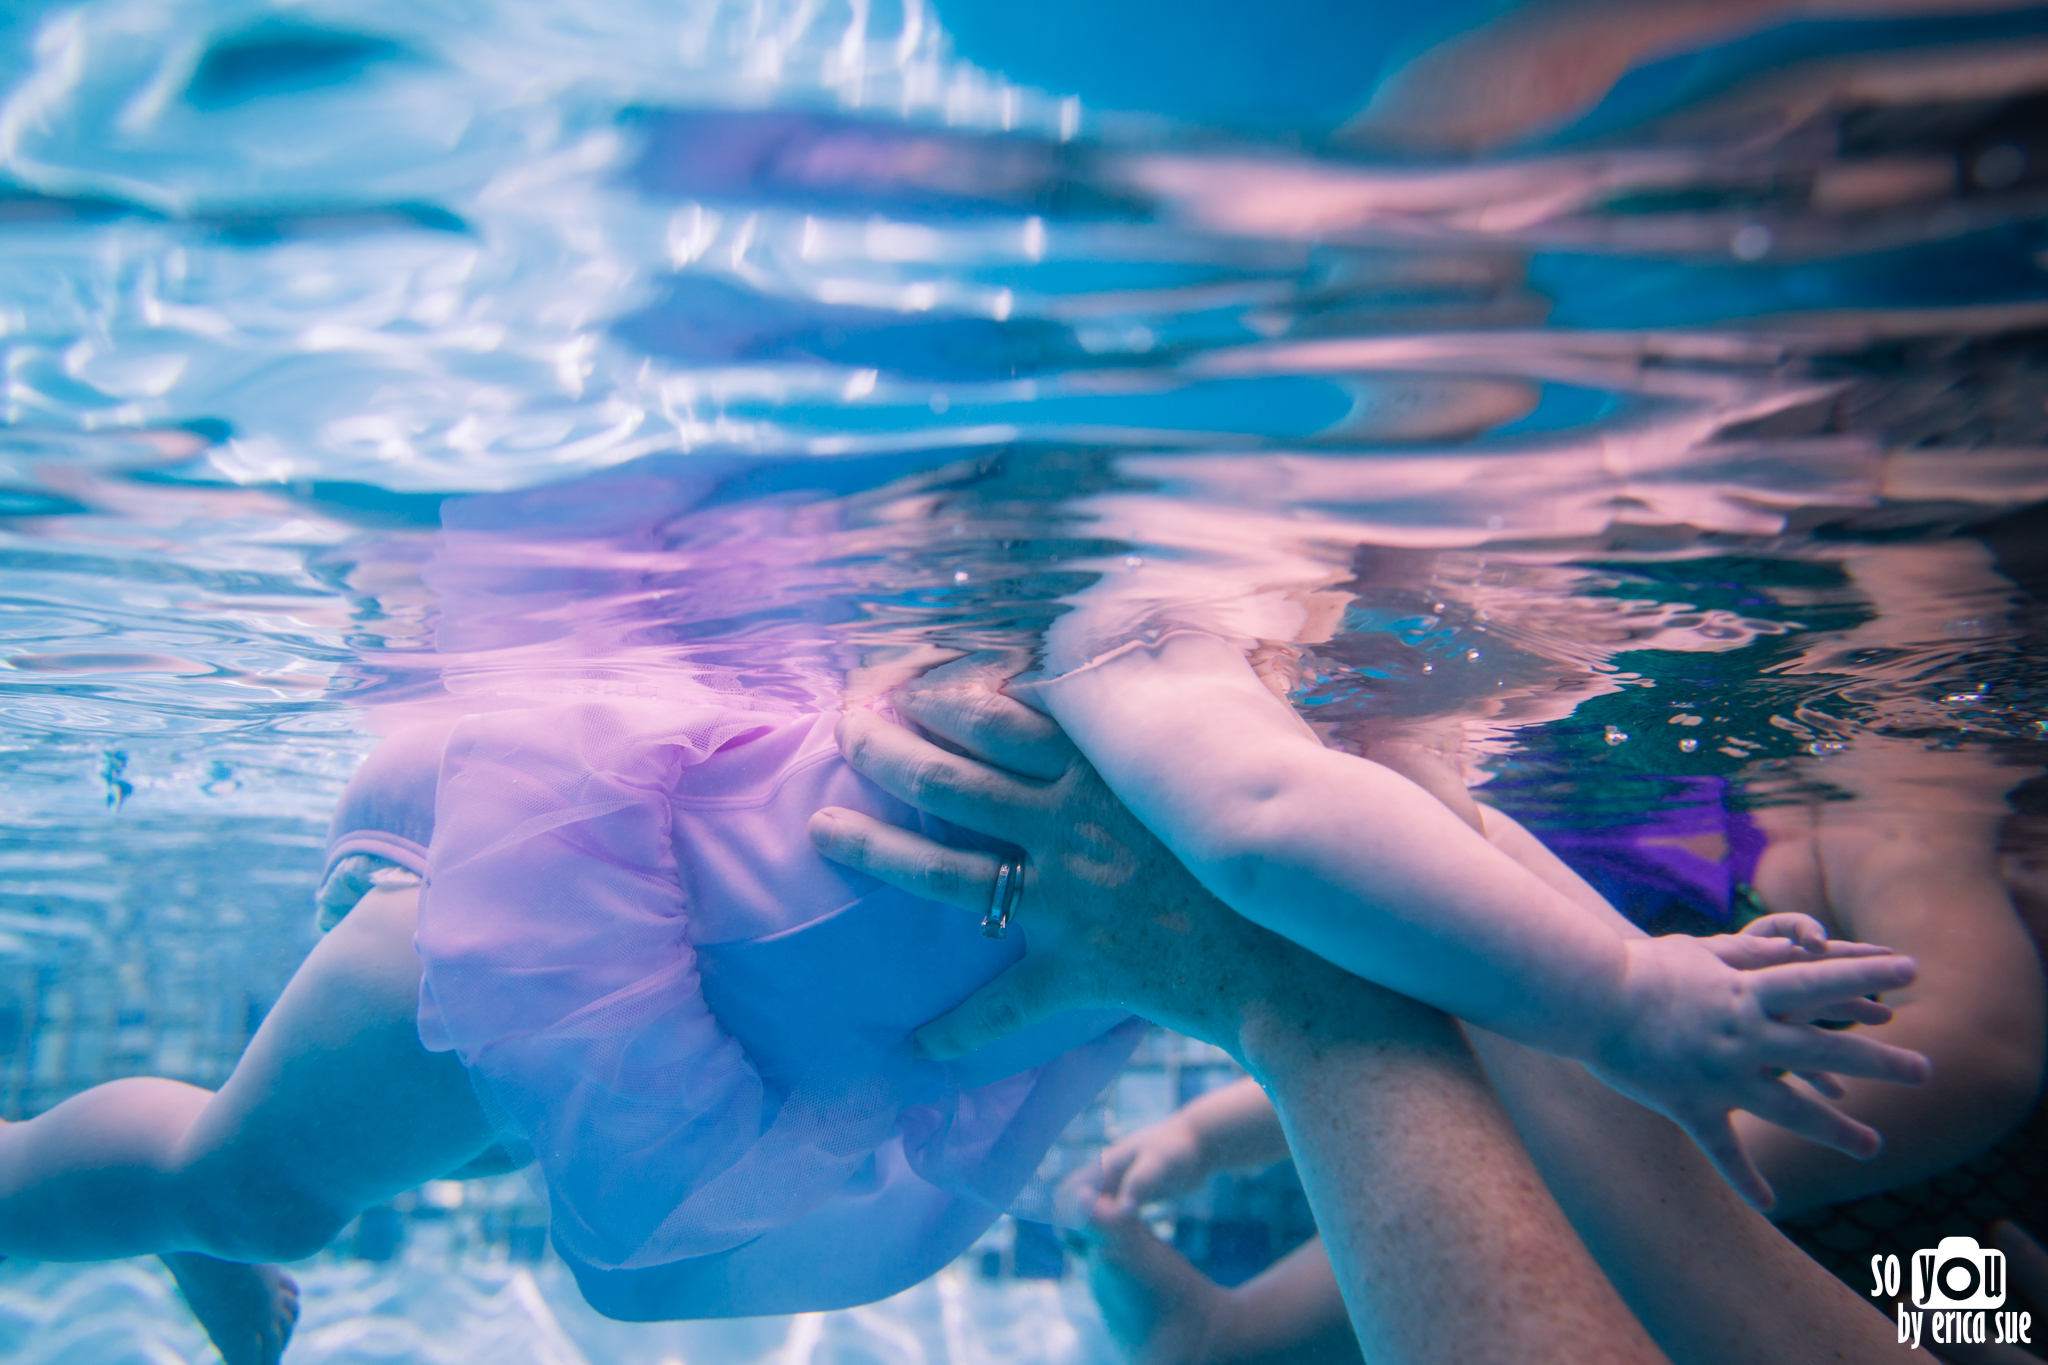 underwater-swim-family-photography-ft-lauderdale-so-you-by-erica-sue-1664.jpg